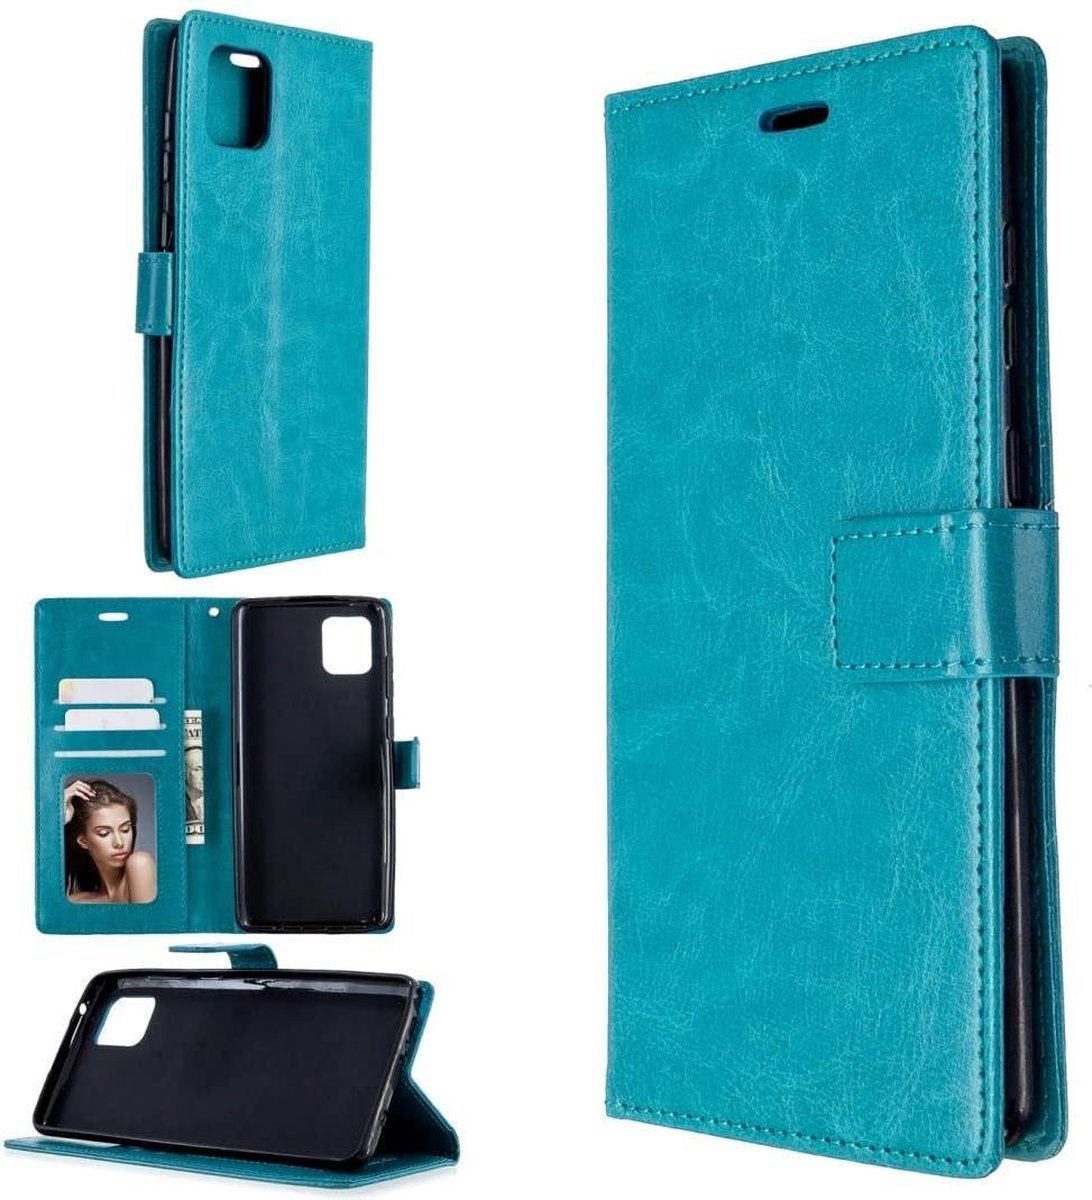 Samsung Galaxy A41 hoesje book case turquoise